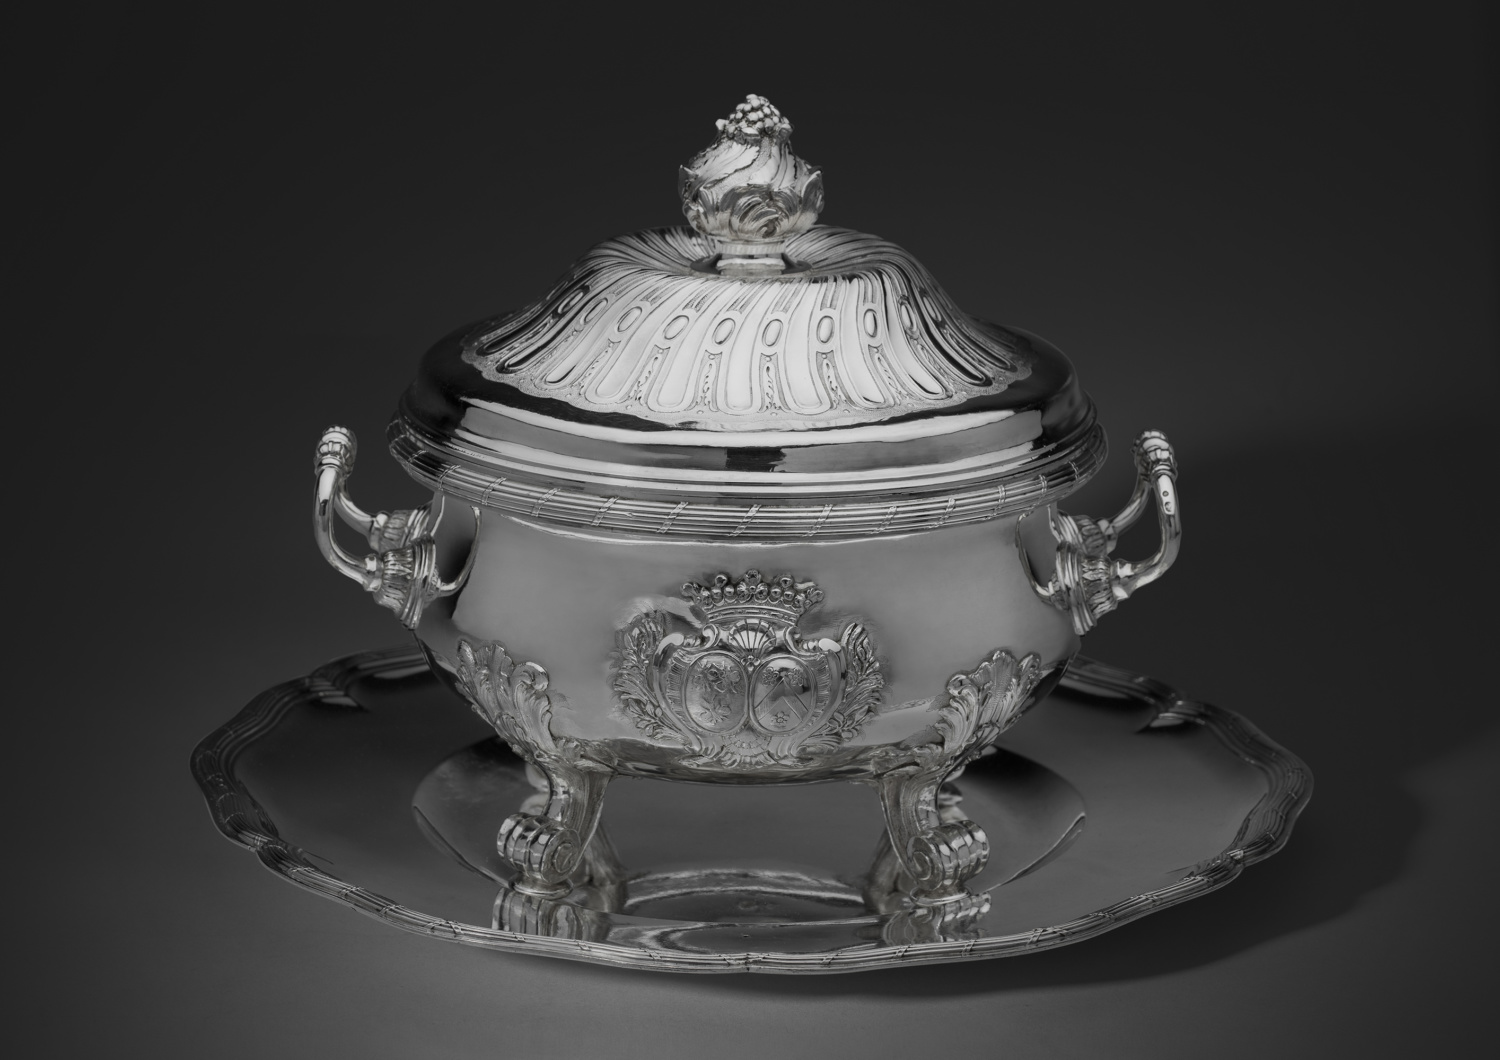 The silver tureen and stand from the Bandeville service - Galerie Kugel